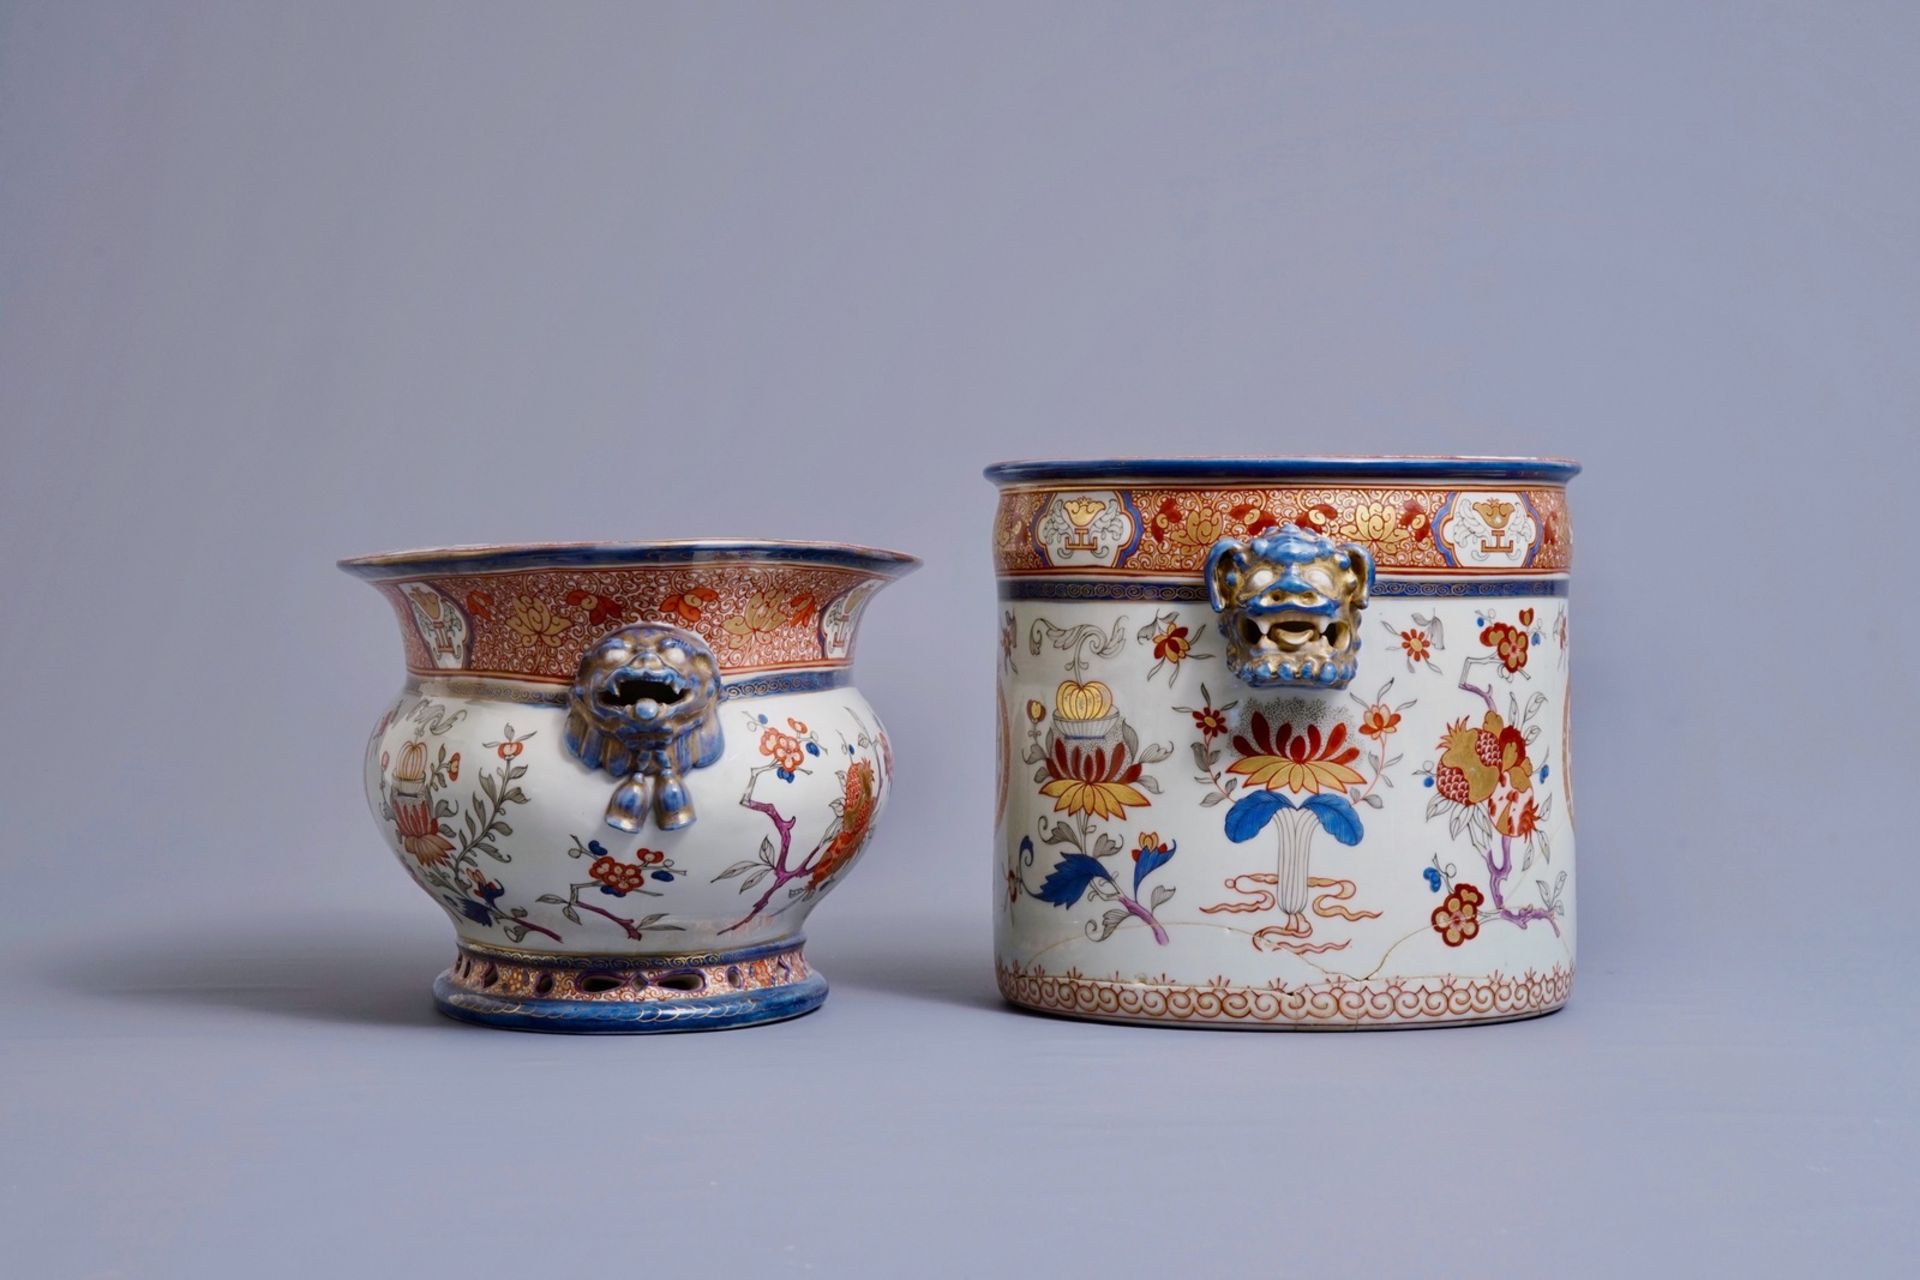 Two coolers with arms of King Louis XV of France in the Chinese export porcelain style, Samson, Pari - Image 5 of 7